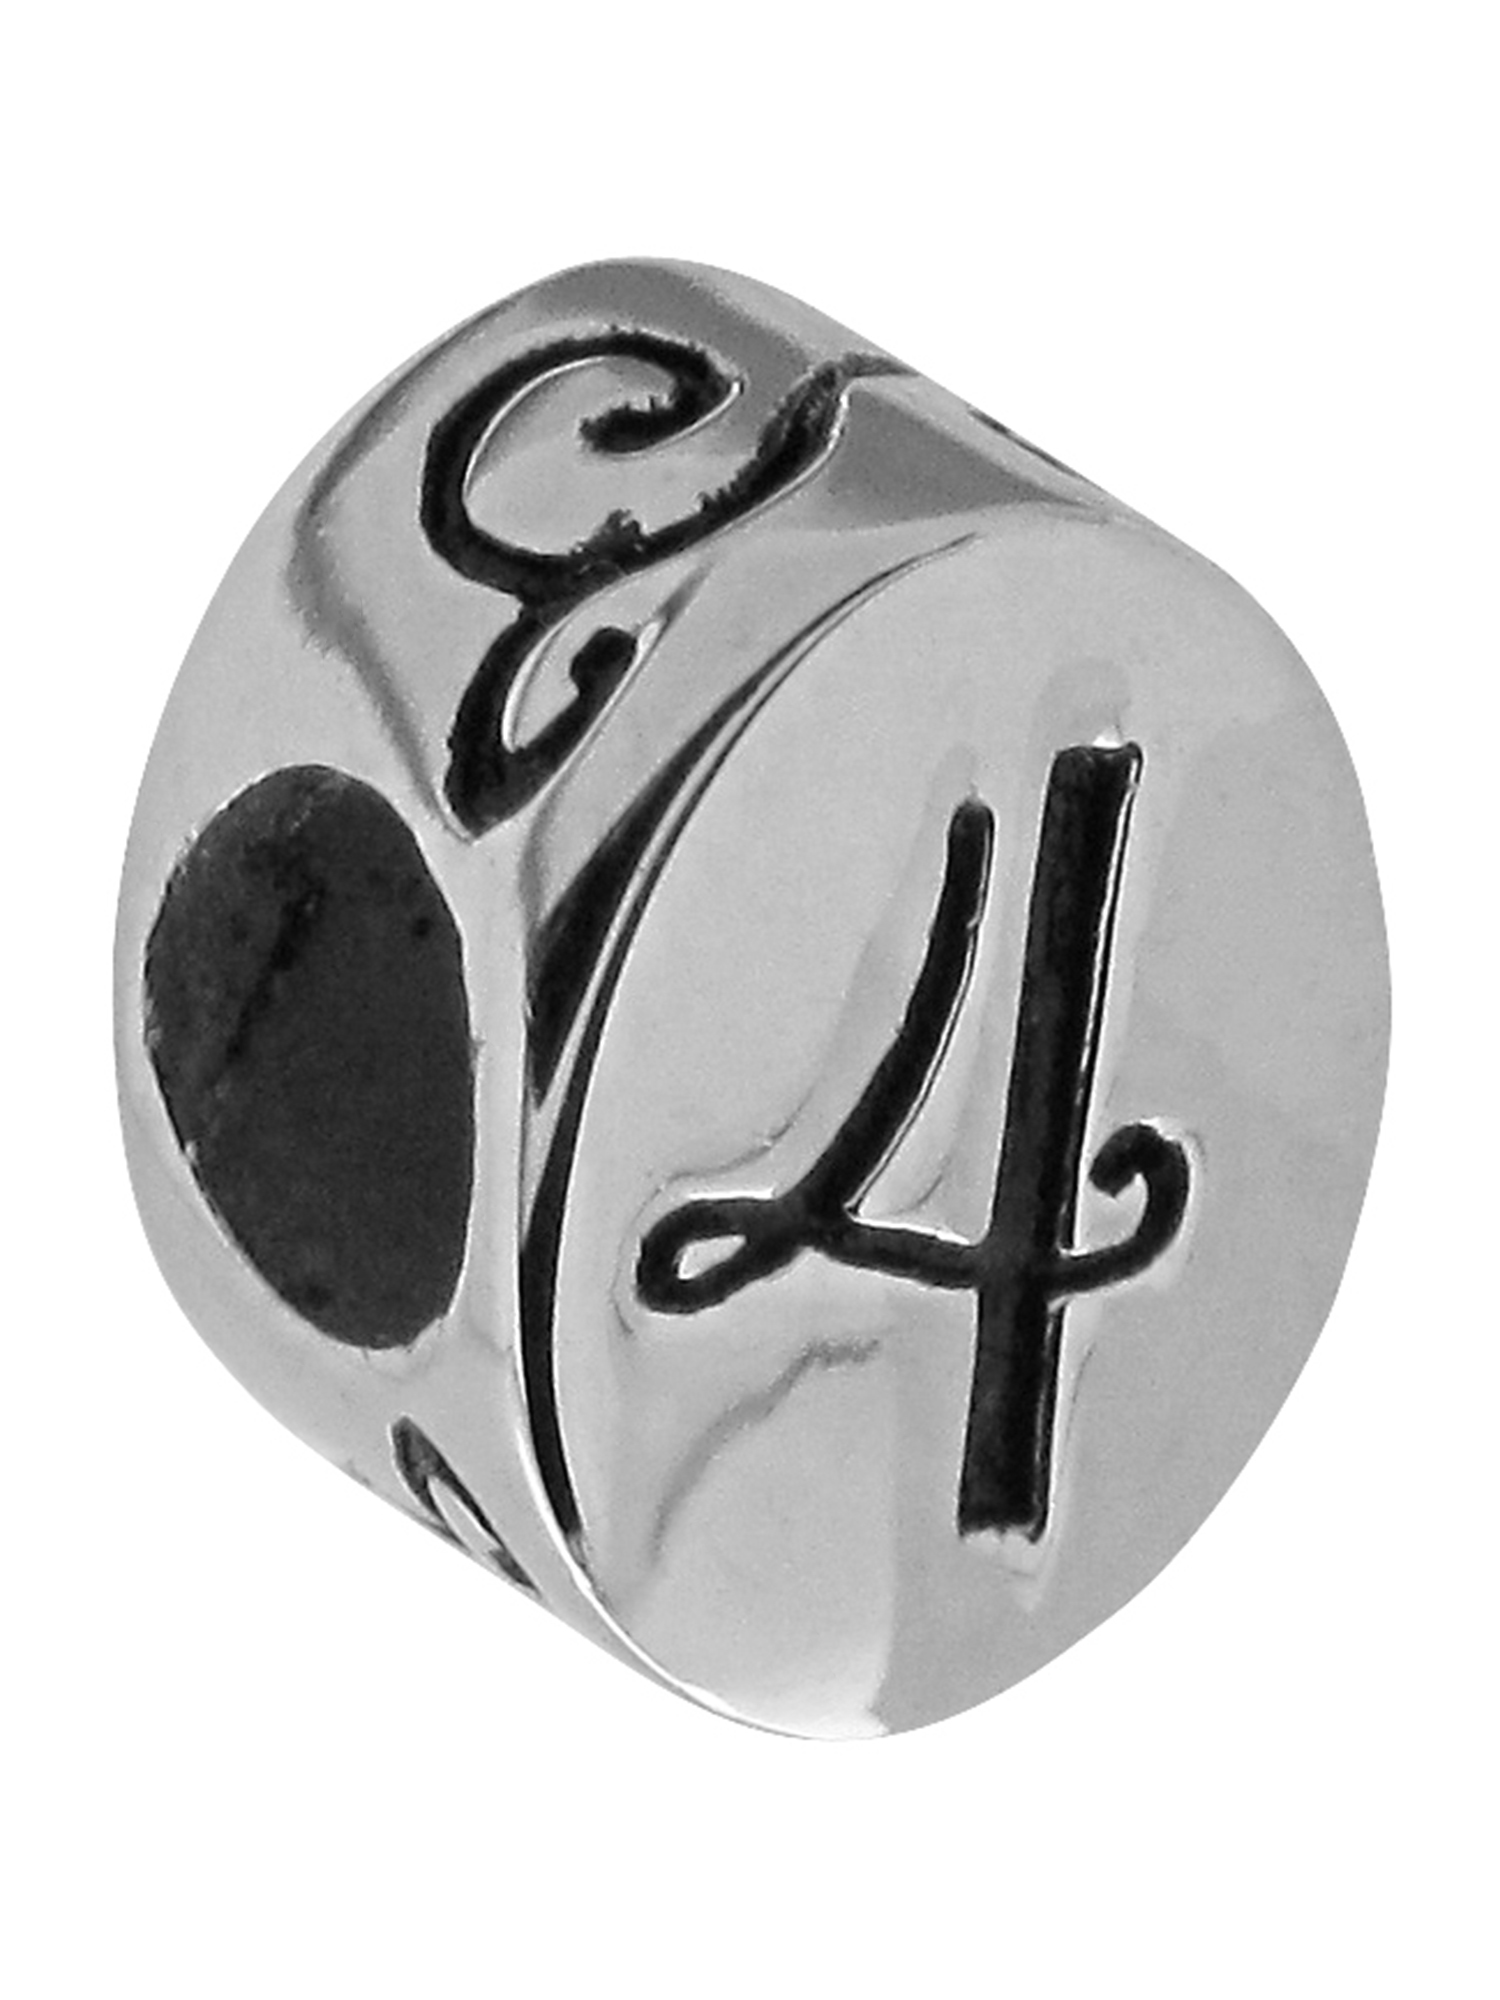 Connections from Hallmark Stainless Steel Number 4 Charm Bead - image 1 of 4